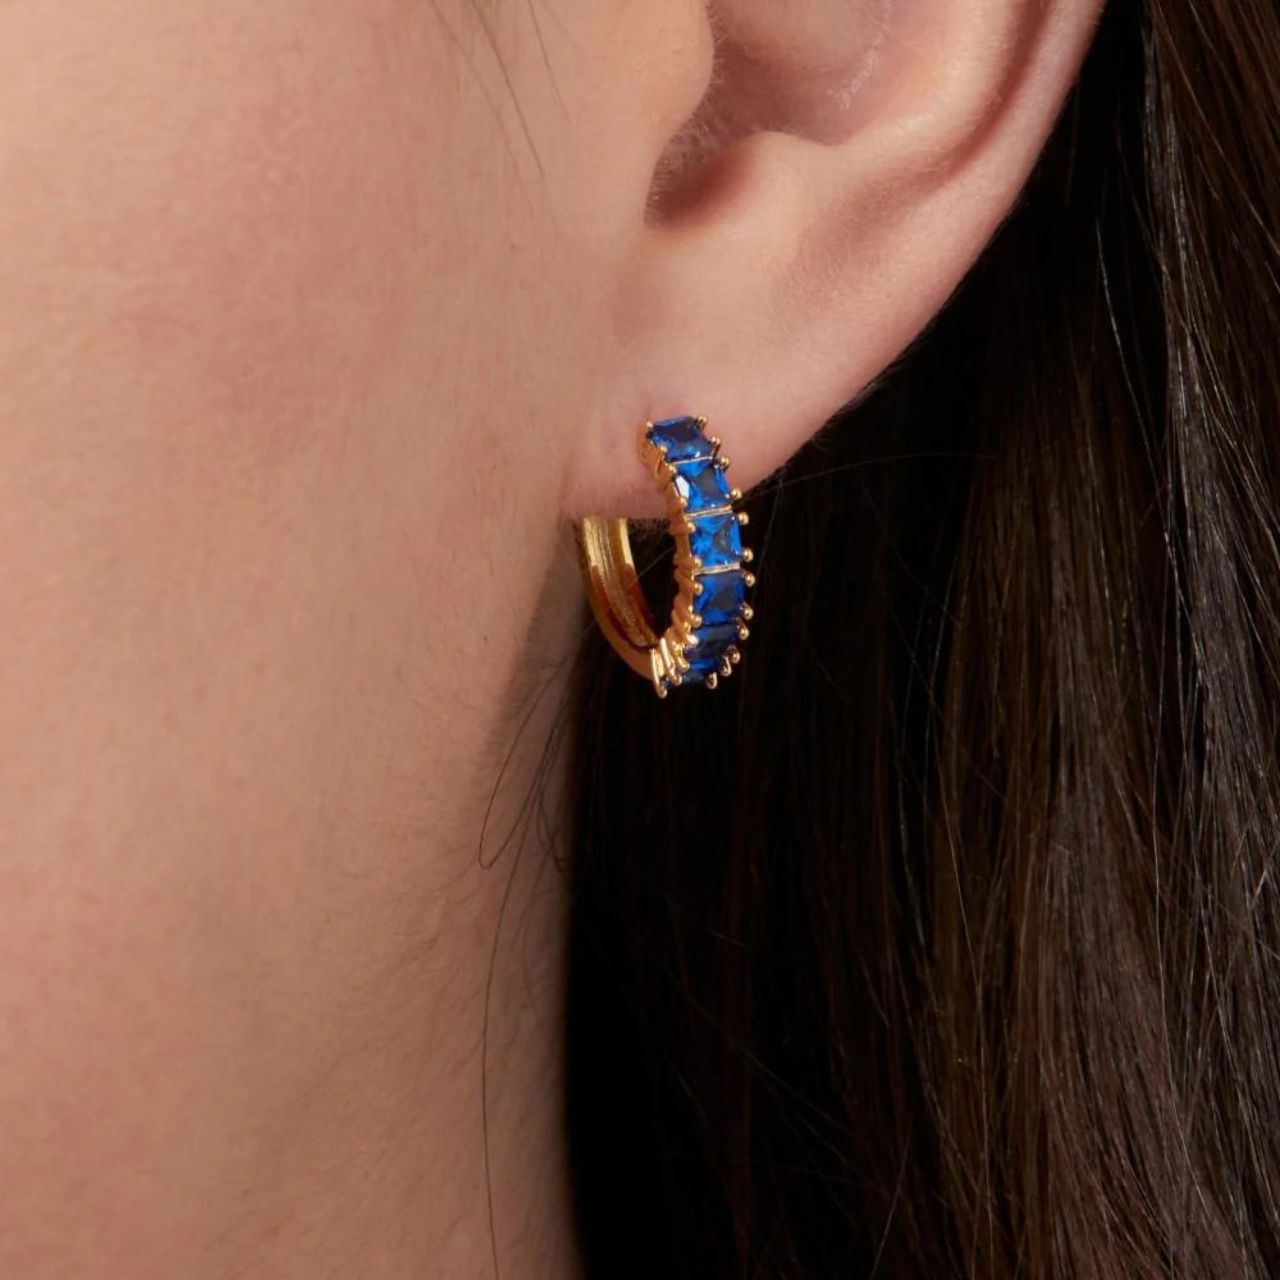 Knight & Day Classic Sapphire Hoops Earrings   Classic style hoops embellished with sapphire CZ stones. Gold plating.